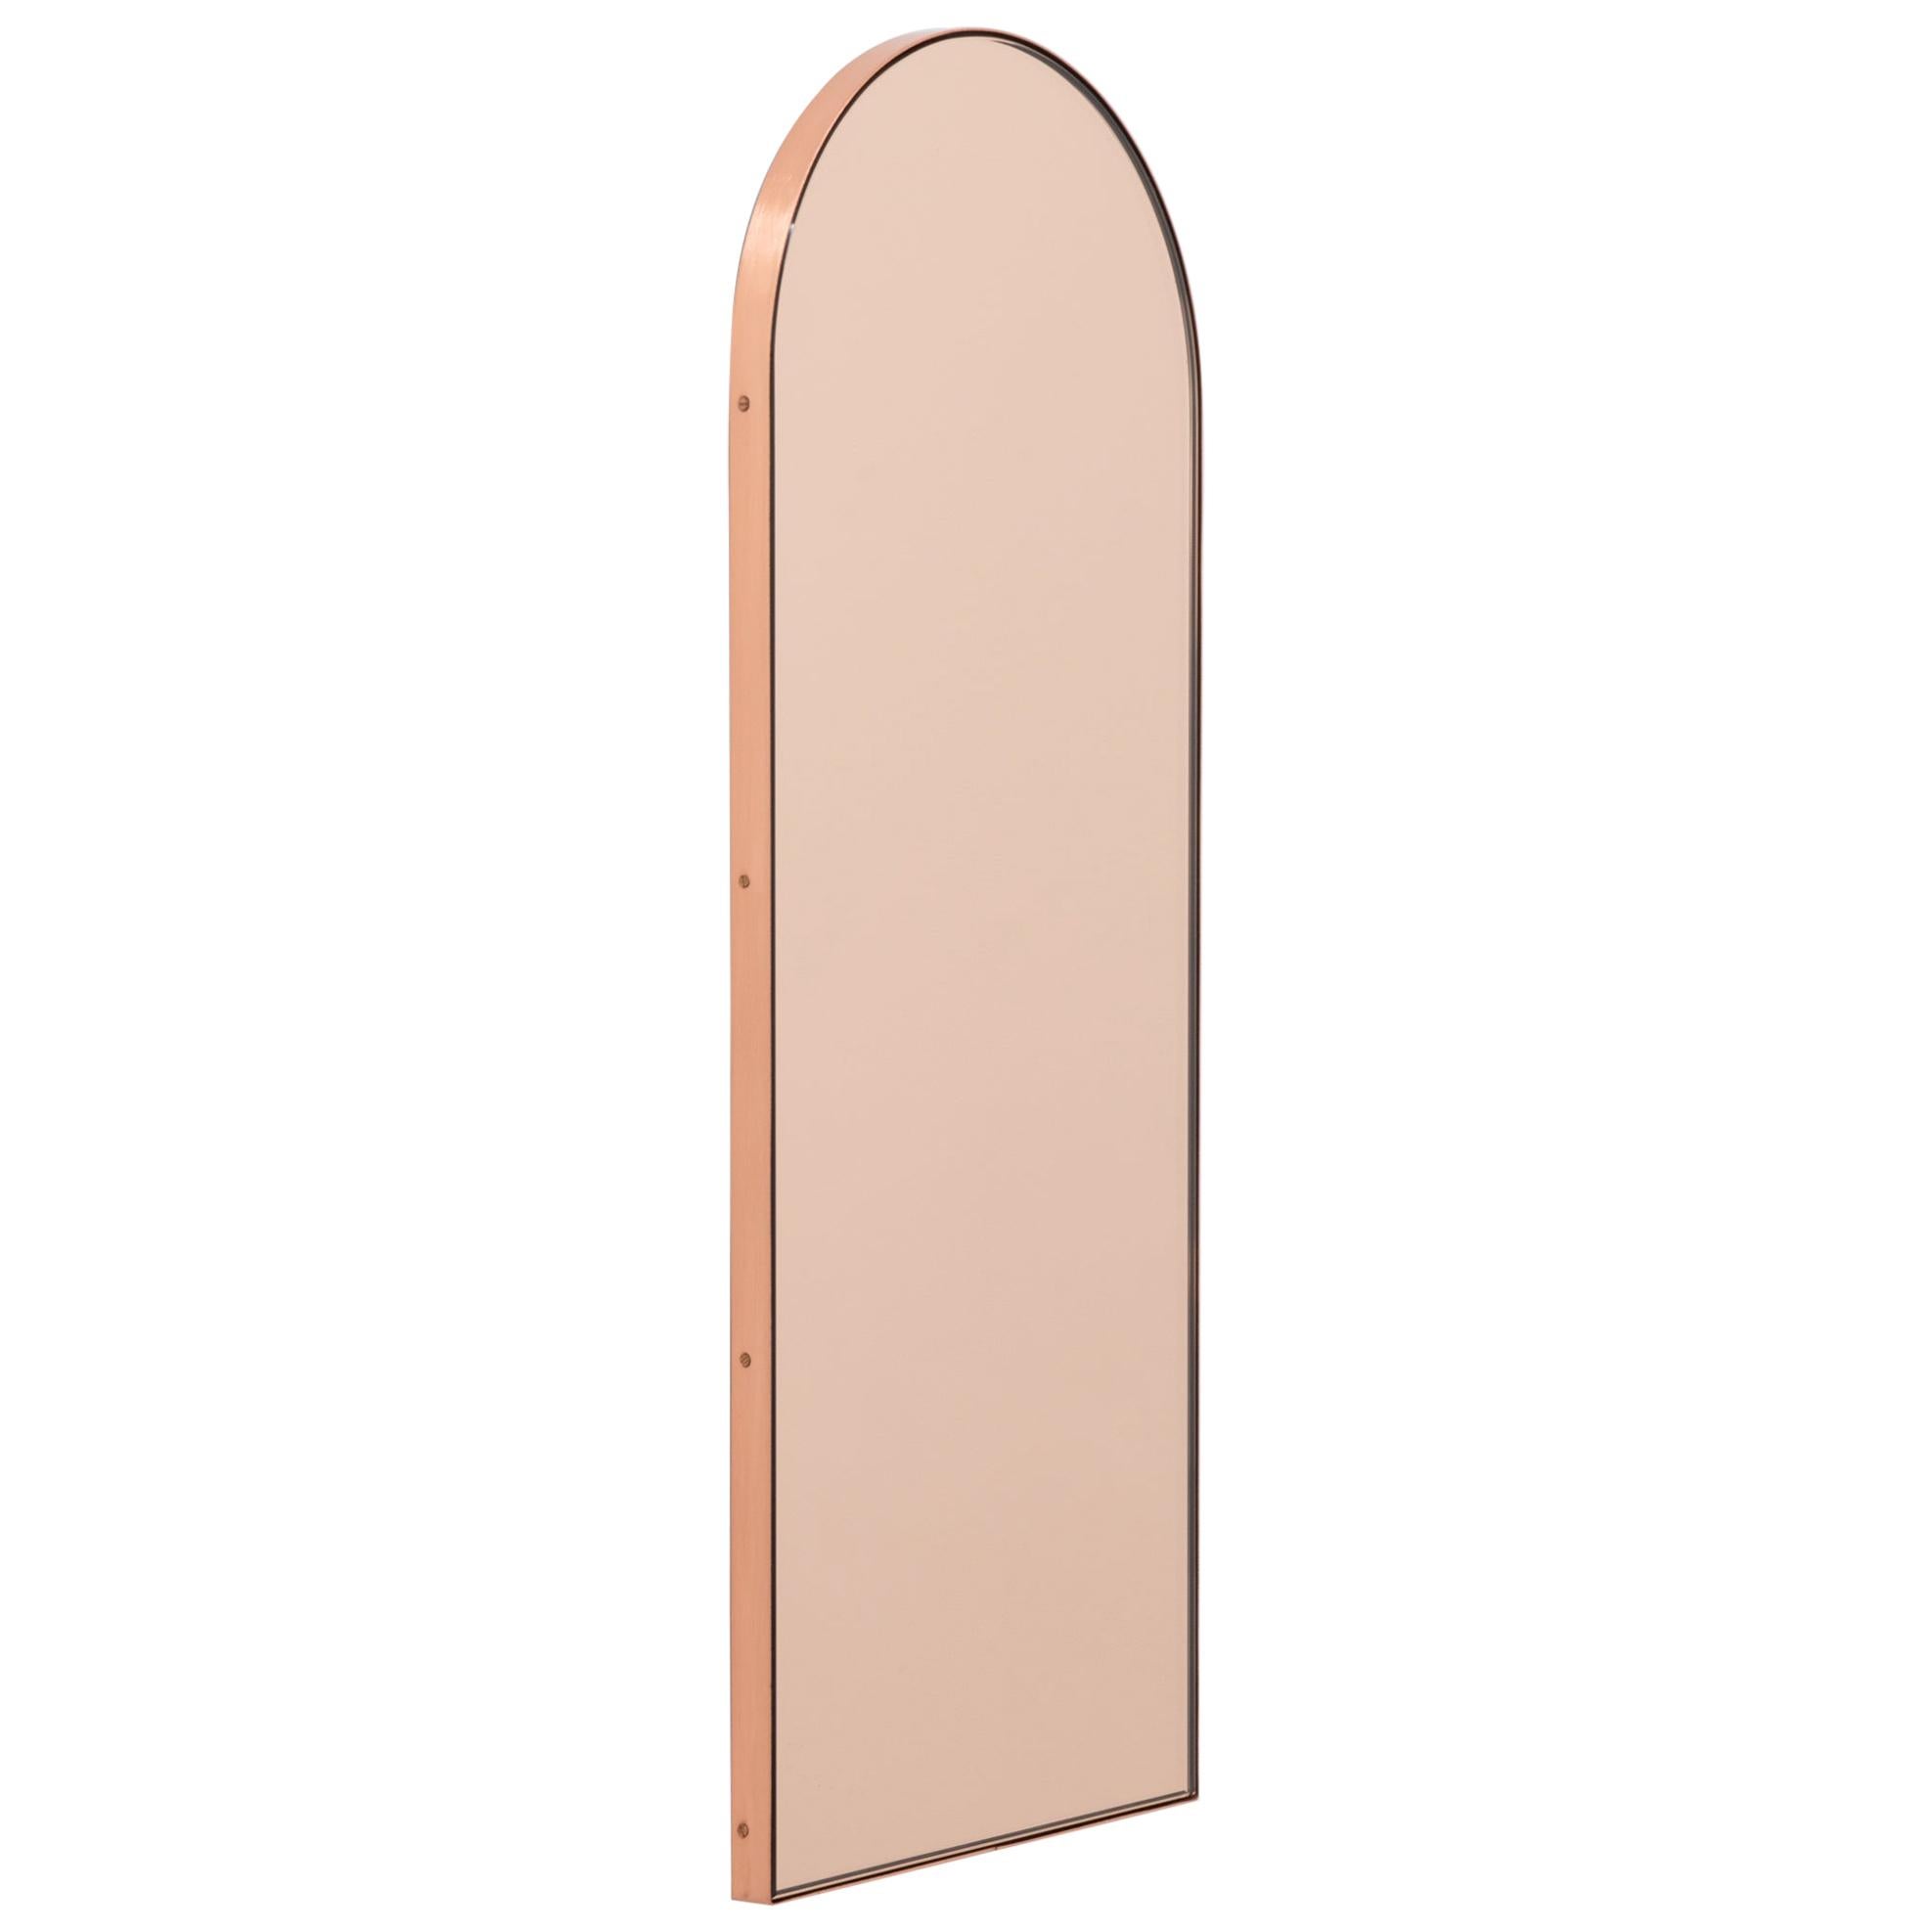 In Stock Arcus Arched Peach Contemporary Mirror with Copper Frame, Small